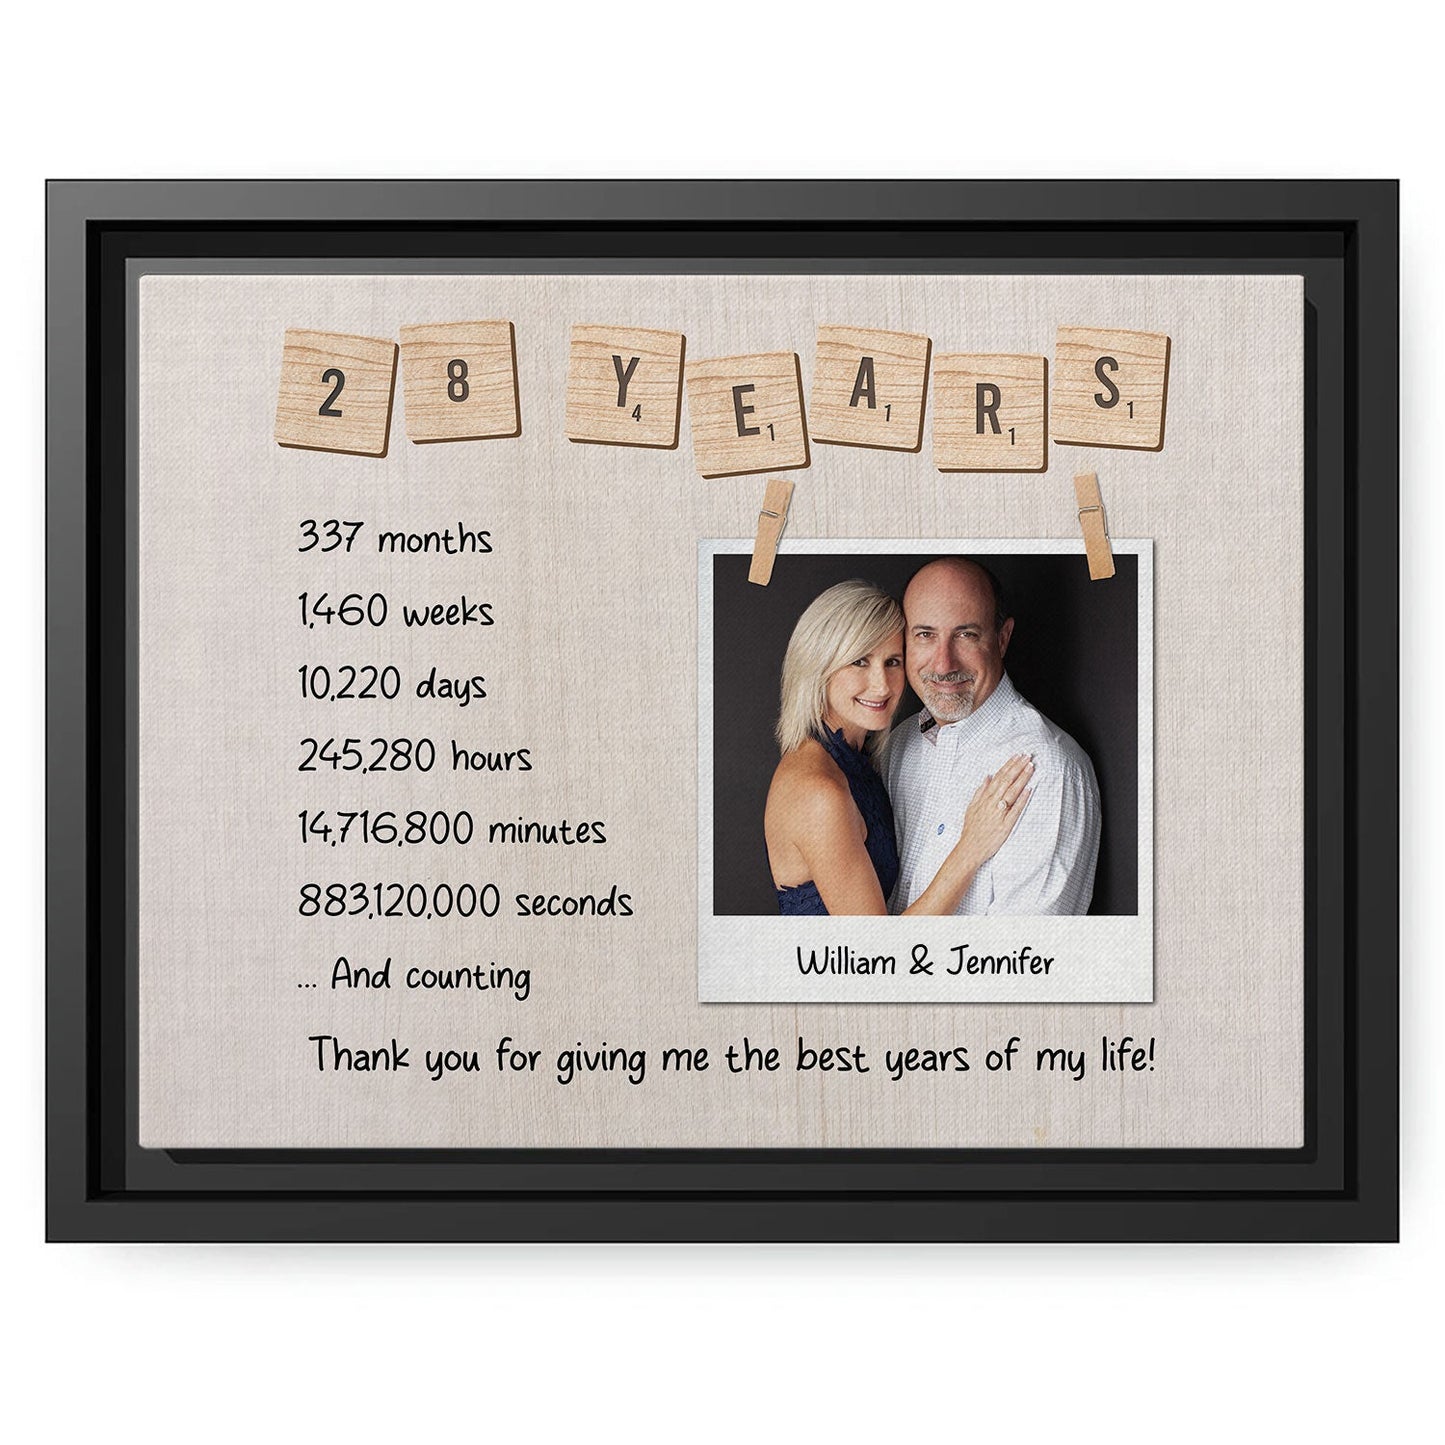 28 Years - Personalized 28 Year Anniversary gift For Husband or Wife - Custom Canvas Print - MyMindfulGifts